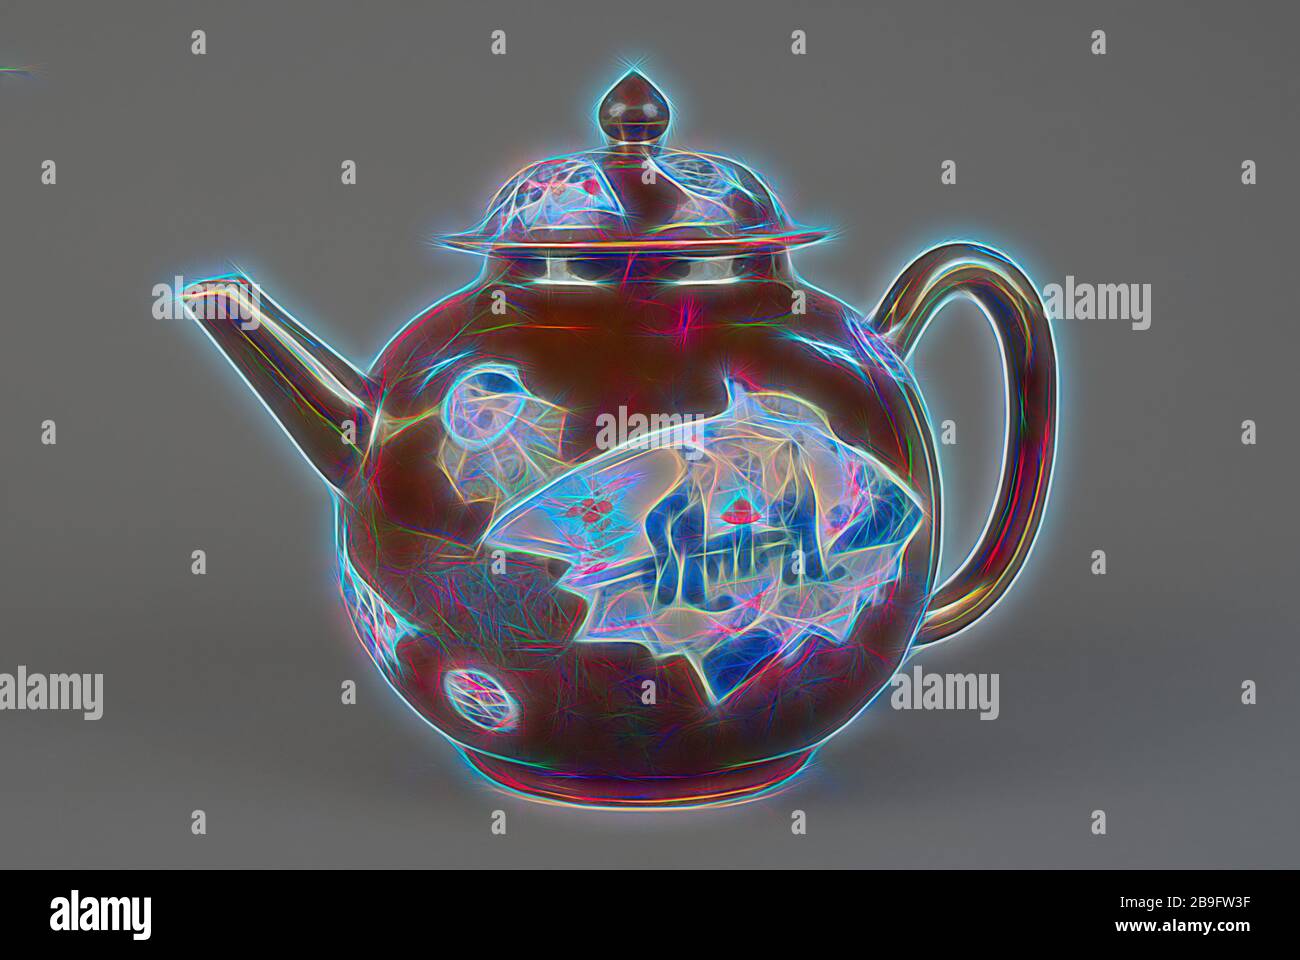 https://c8.alamy.com/comp/2B9FW3F/teapot-brown-with-saved-fields-in-which-representations-in-red-and-blue-on-white-background-teapot-tableware-holder-earthenware-ceramic-porcelain-glaze-ring-103-hand-turned-molded-glazed-painted-teapot-round-belly-and-short-oblique-upright-spout-straight-and-conical-oval-ear-whole-surface-brown-glazed-in-which-saved-fields-in-which-flowers-and-long-roses-at-balustrade-in-landscape-in-red-and-blue-against-white-background-tea-tea-serve-tea-serve-serve-china-capuchin-brown-chinese-cafe-au-lait-feuille-morte-tzu-chin-2B9FW3F.jpg